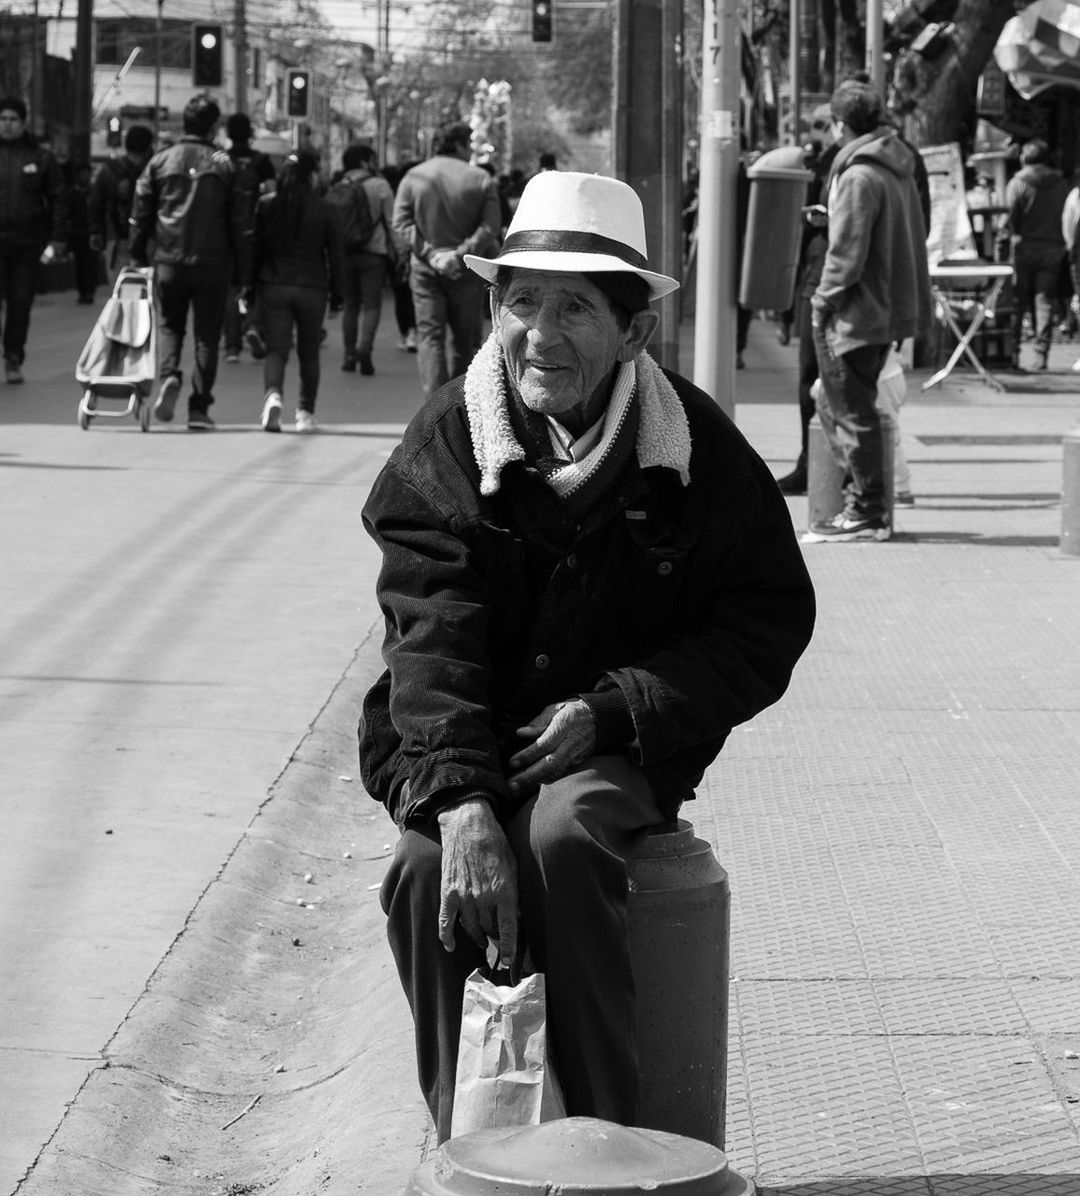 city, street, real people, men, incidental people, hat, clothing, people, adult, day, lifestyles, architecture, leisure activity, males, senior adult, city street, city life, full length, outdoors